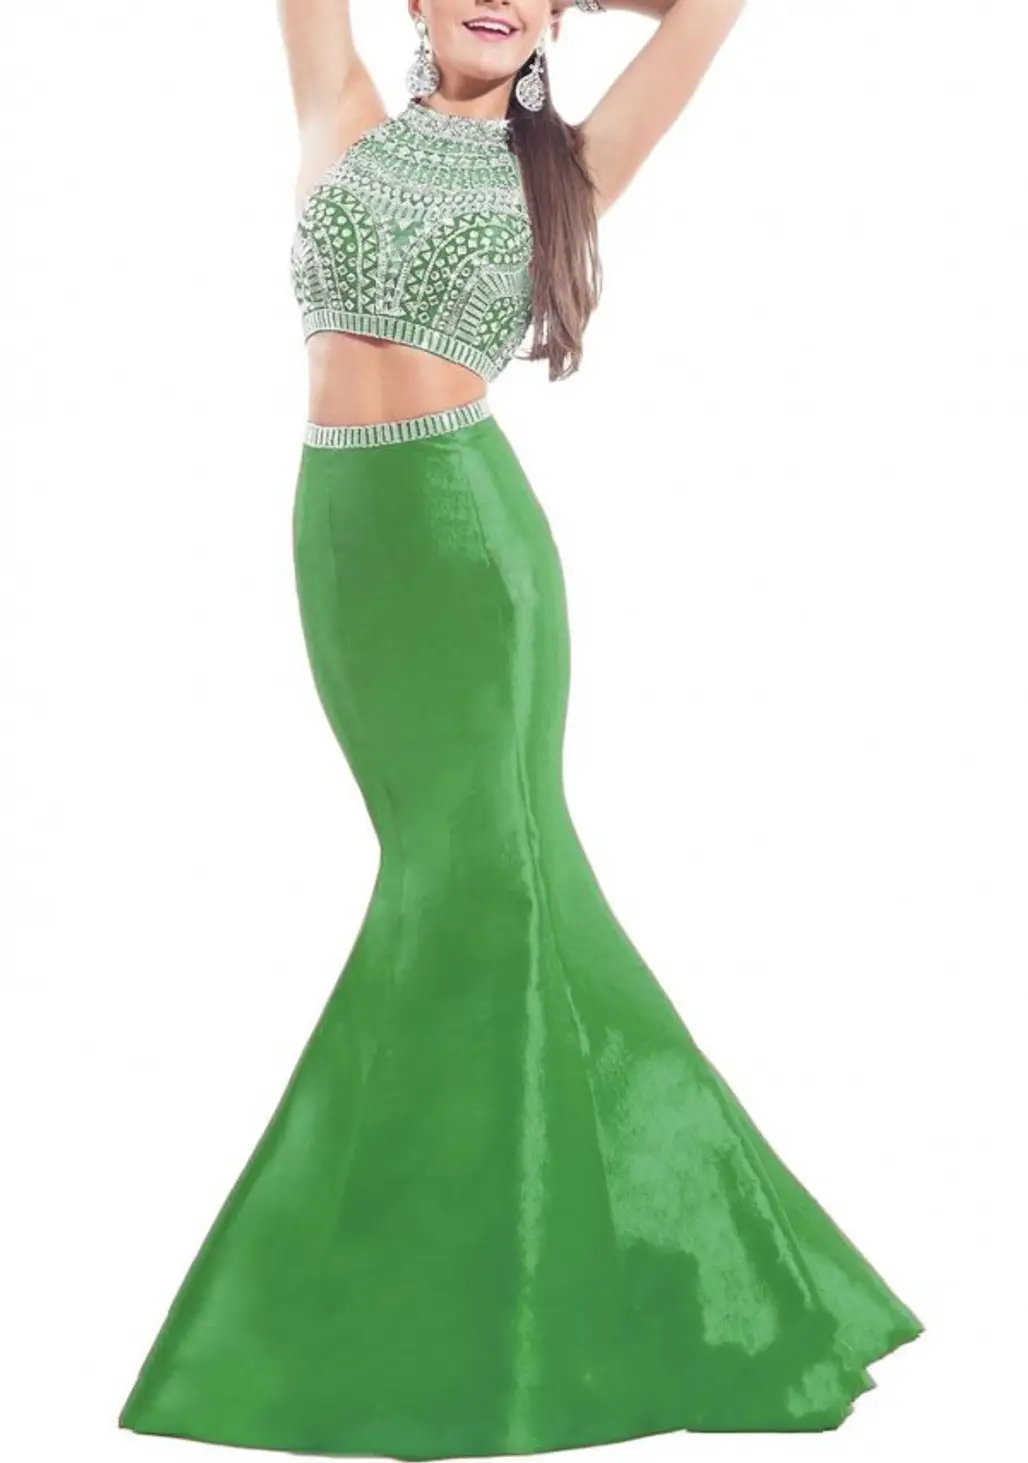 green,dress,clothing,gown,cocktail dress,